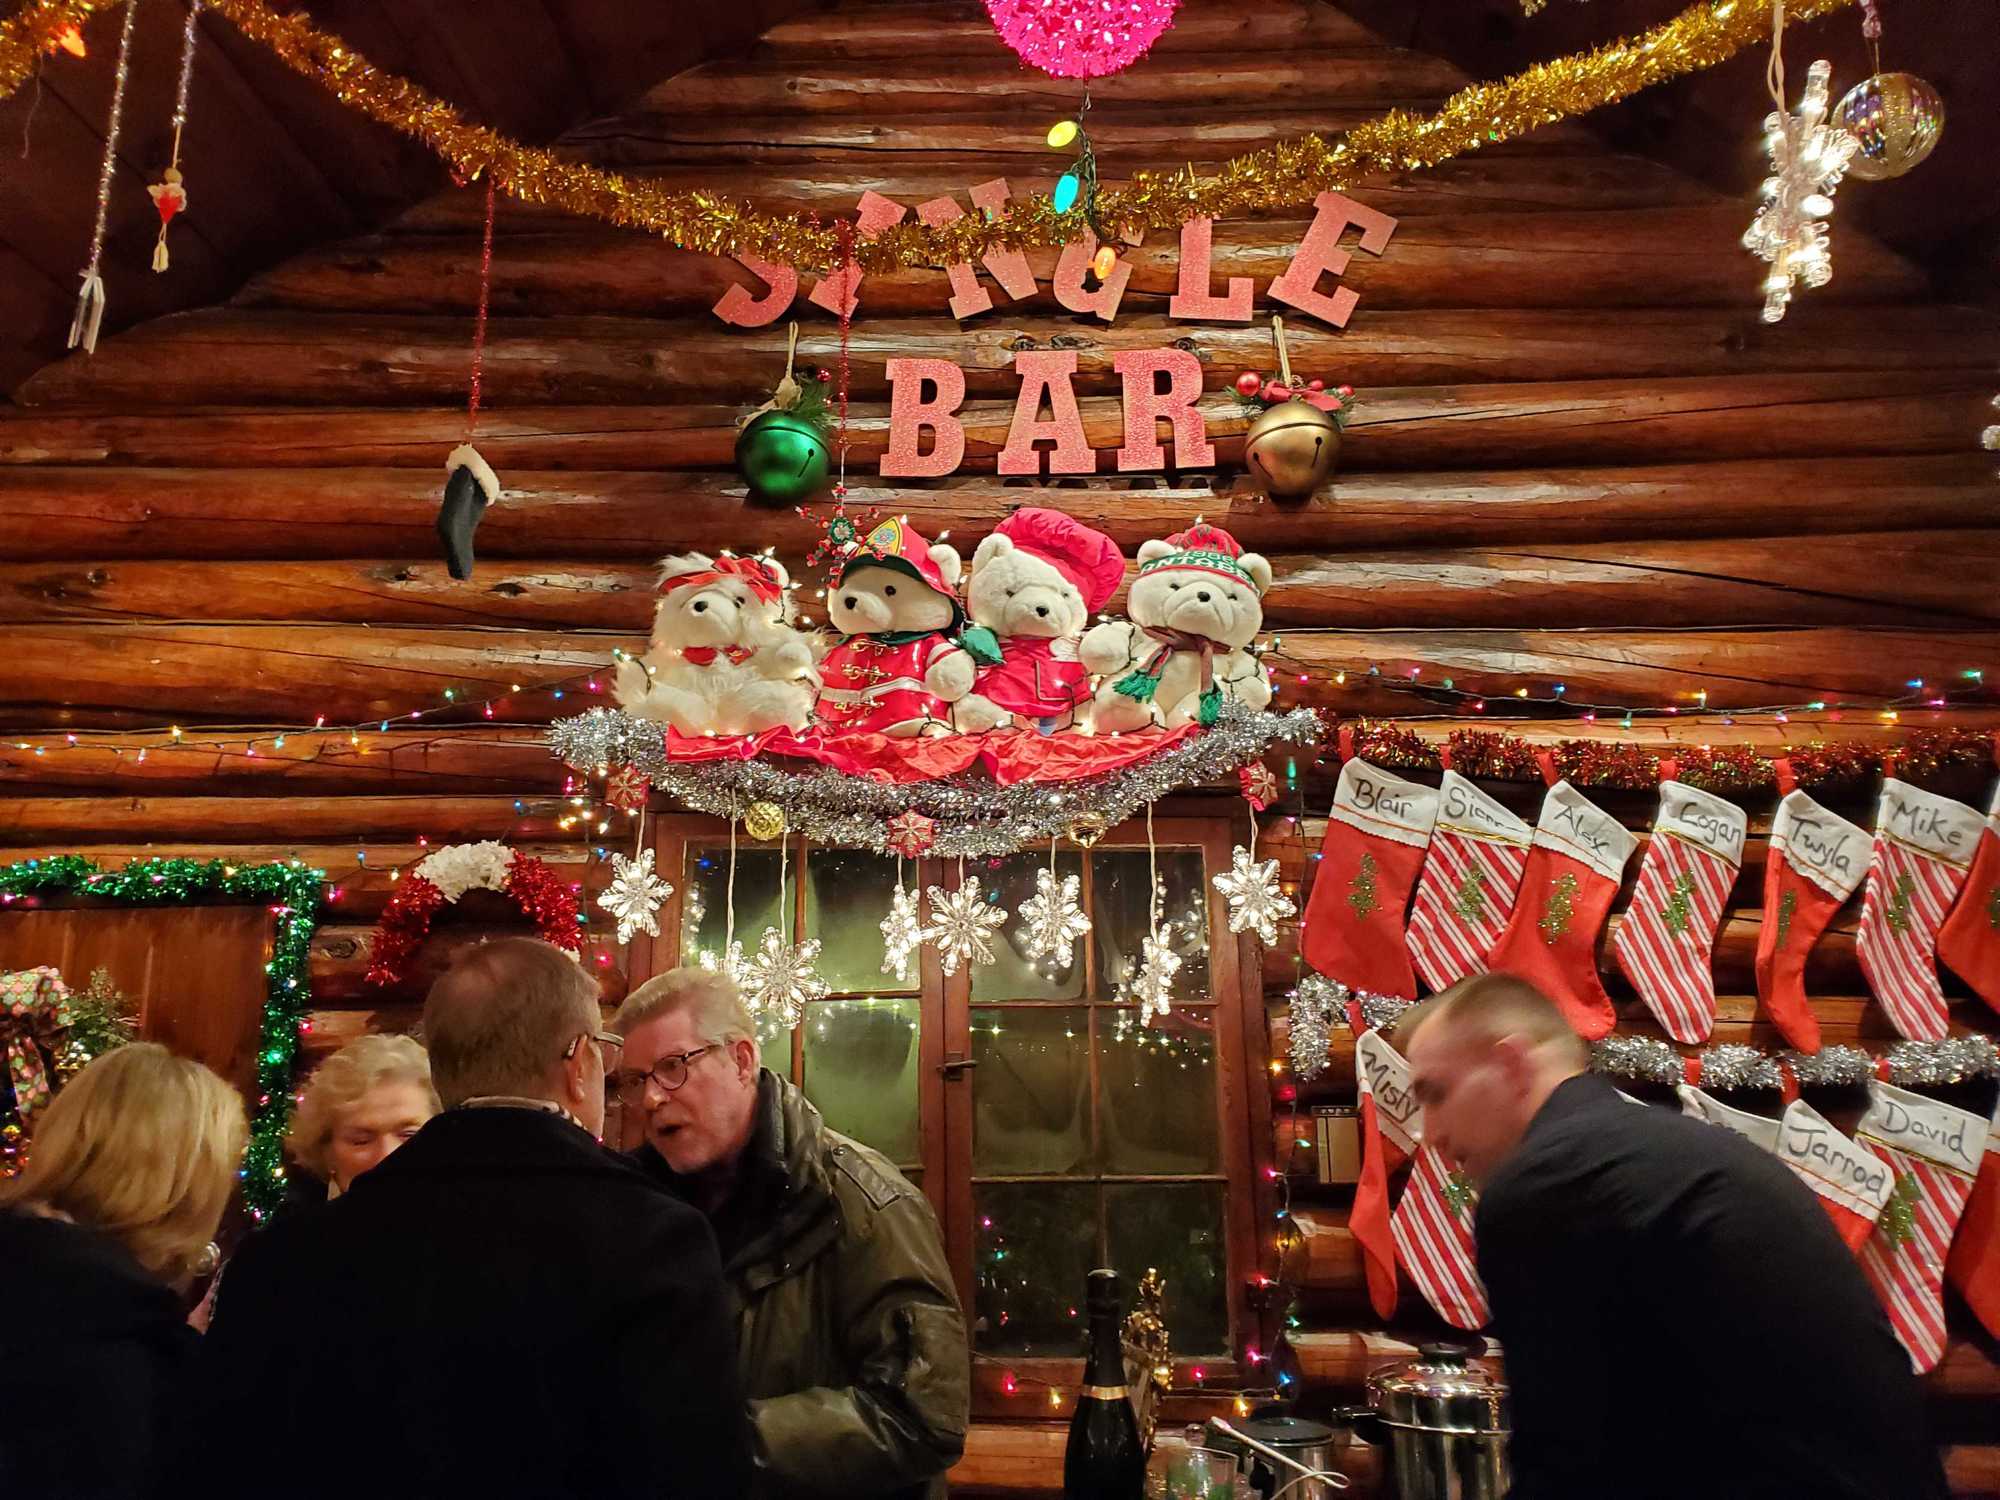 The Old Log Theatre's 100-year-old log cabin is this year's Jingle Bar.